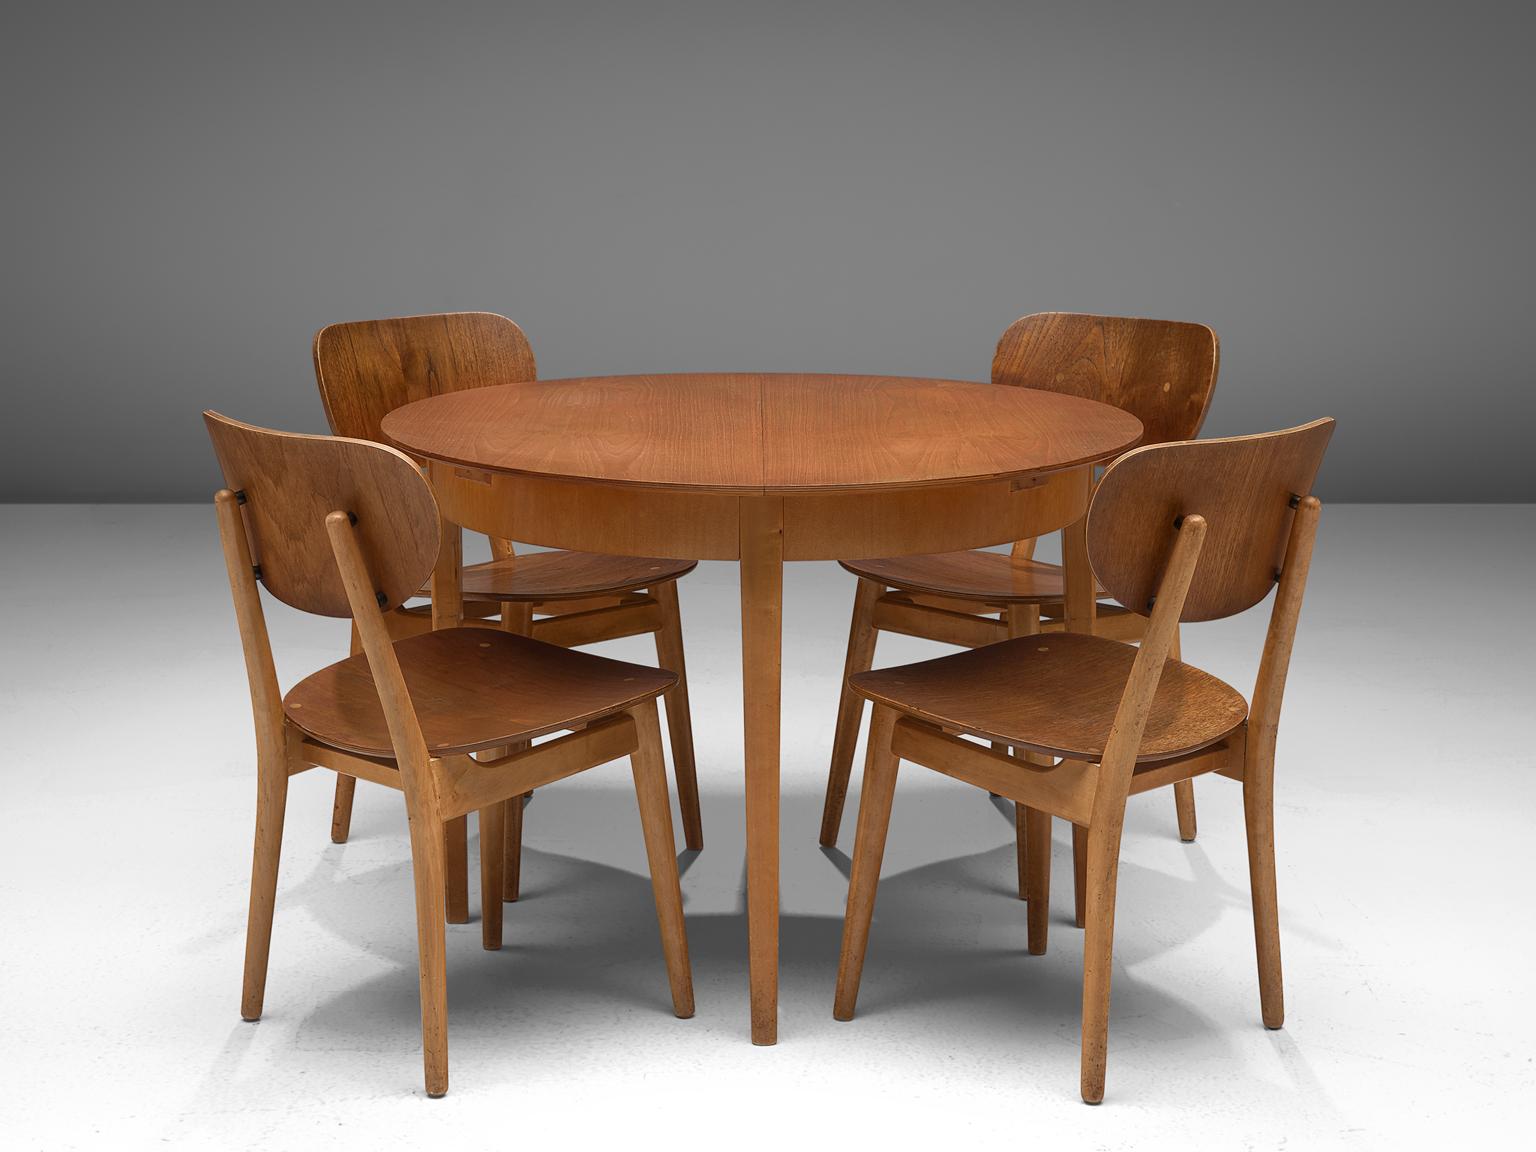 Cees Braakman for Pastoe, dining set with table TB35 and four chairs SB11, birch and teak, The Netherlands, 1950s

Matching dining set consisting of a TB35 table and four SB11 chairs by Dutch designer Cees Braakman for UMS Pastoe.
This dining set is